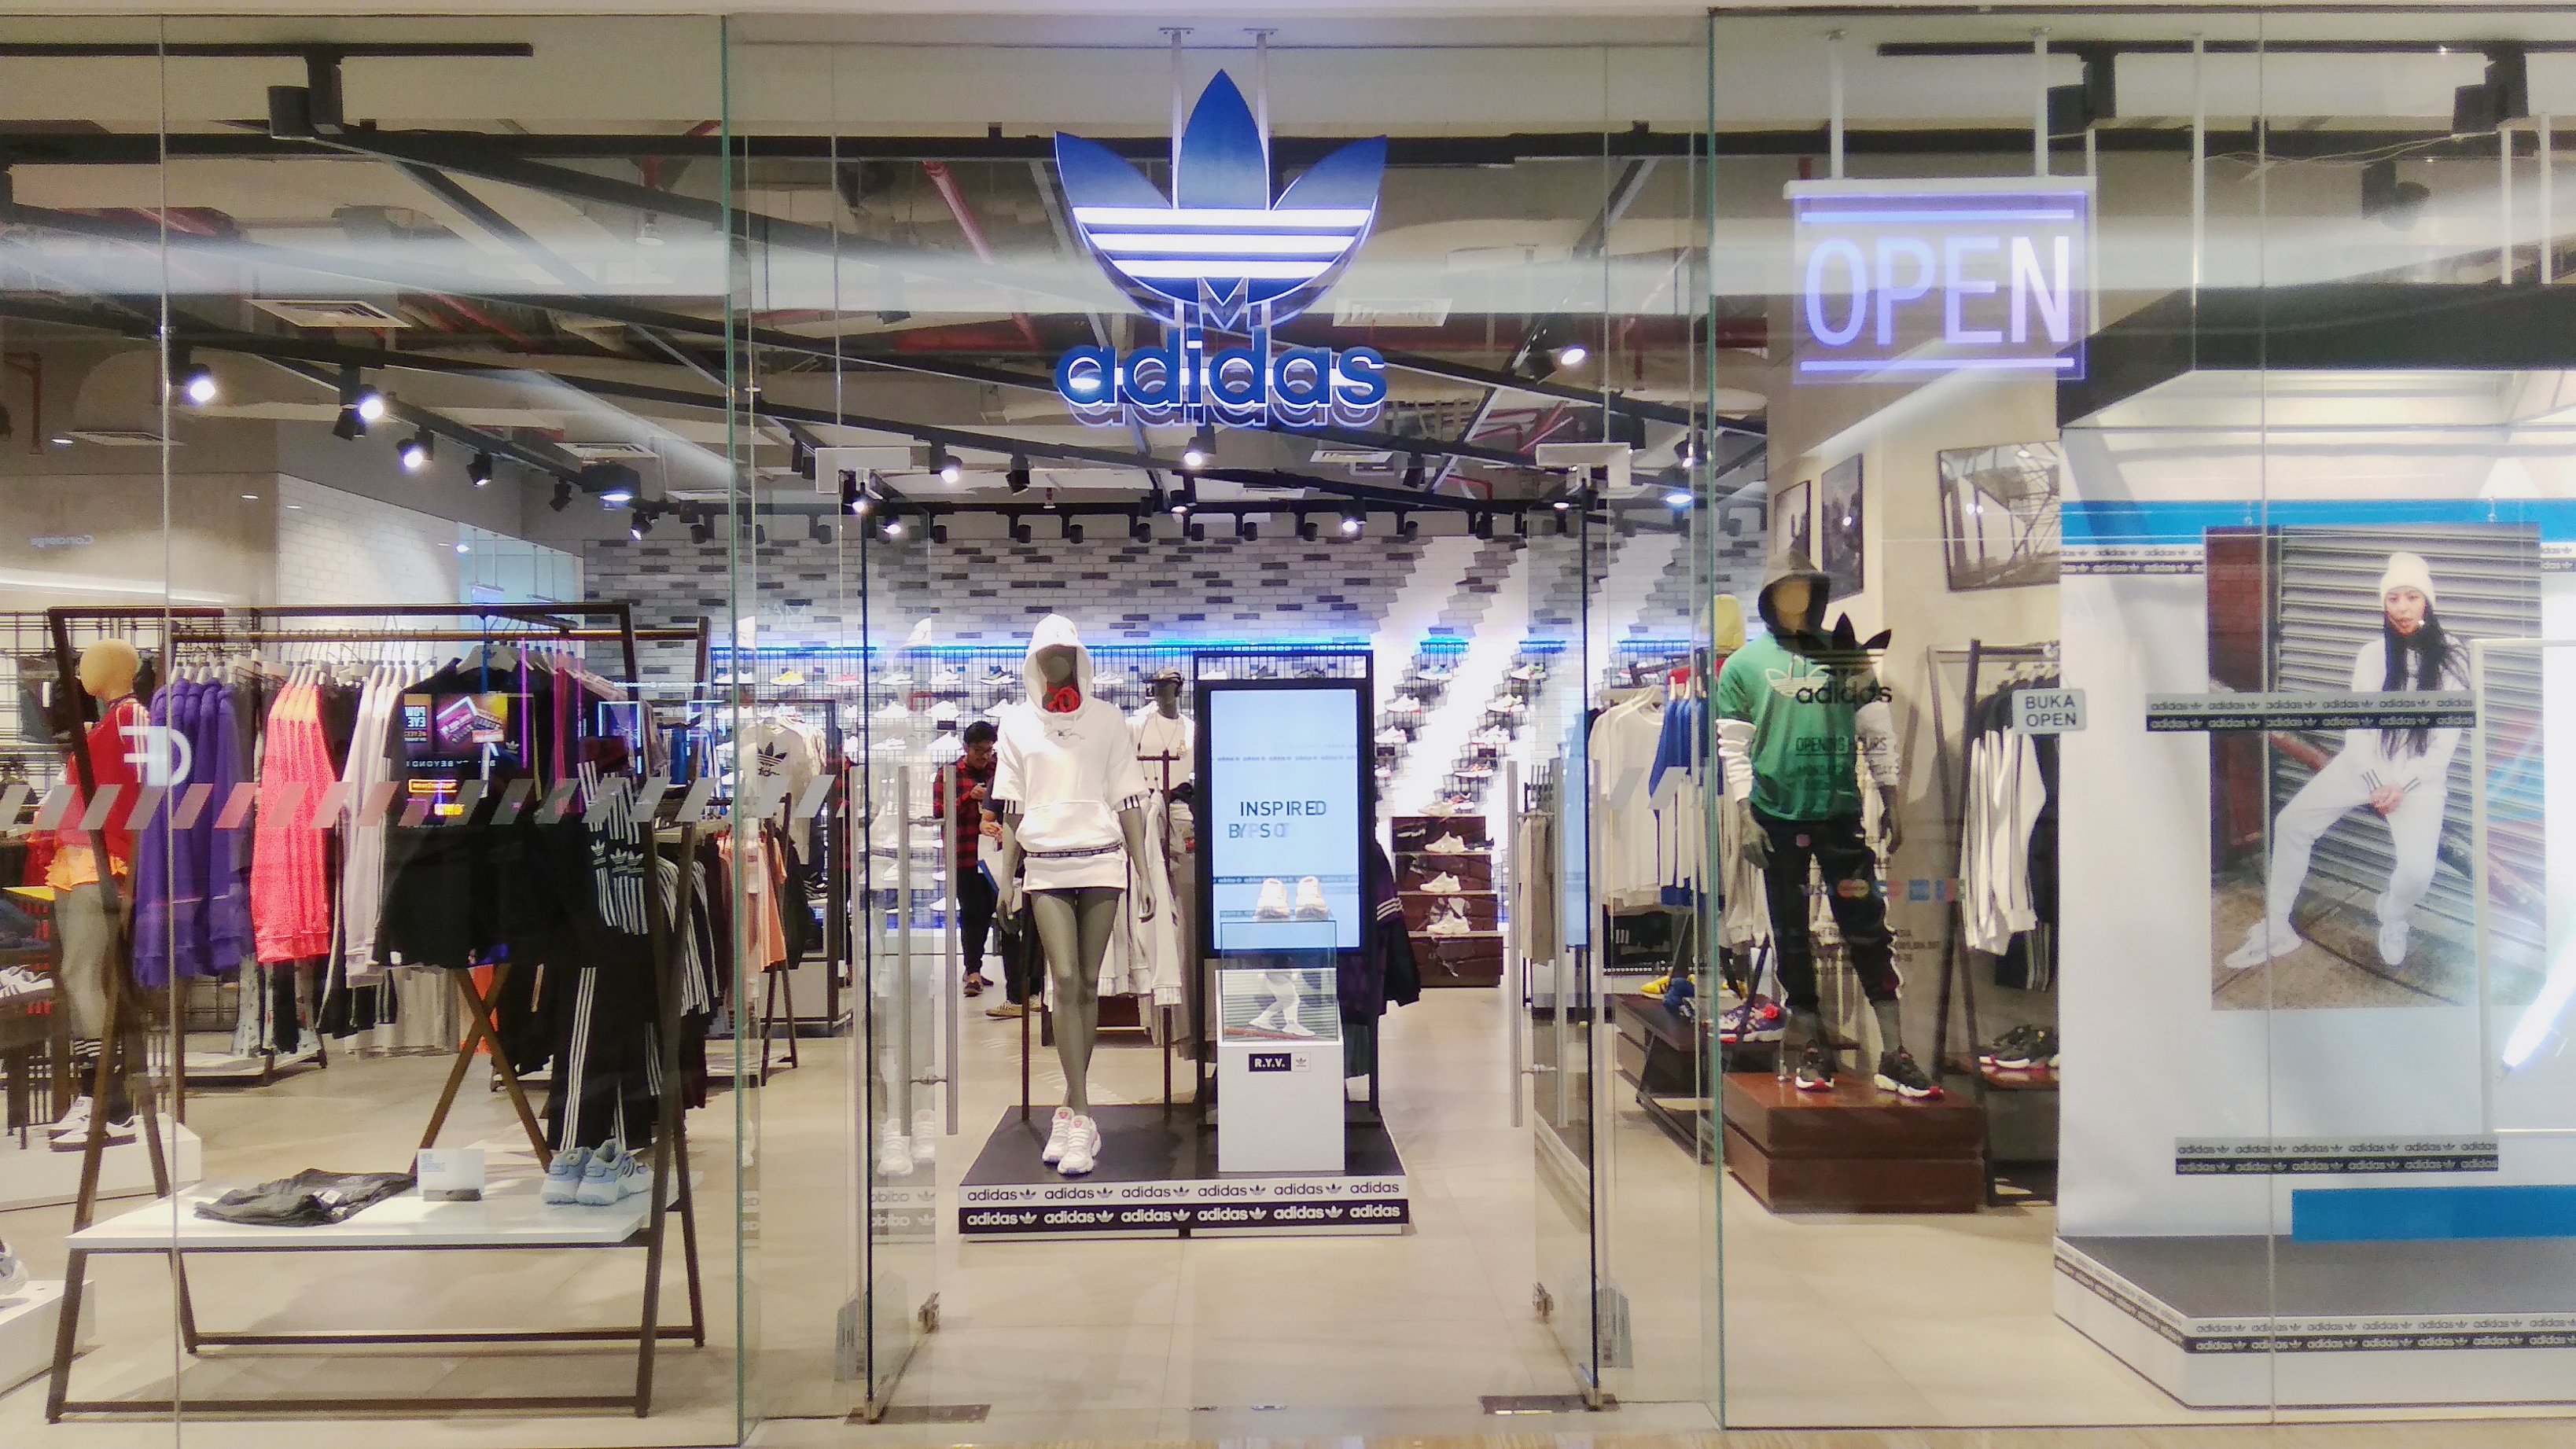 plazaindonesia on Twitter: "Adidas store in Plaza Indonesia is specially Adidas Originals, when it's all about daily lifestyle with athleisure look, and you find one-of-a-kind collab here. Go